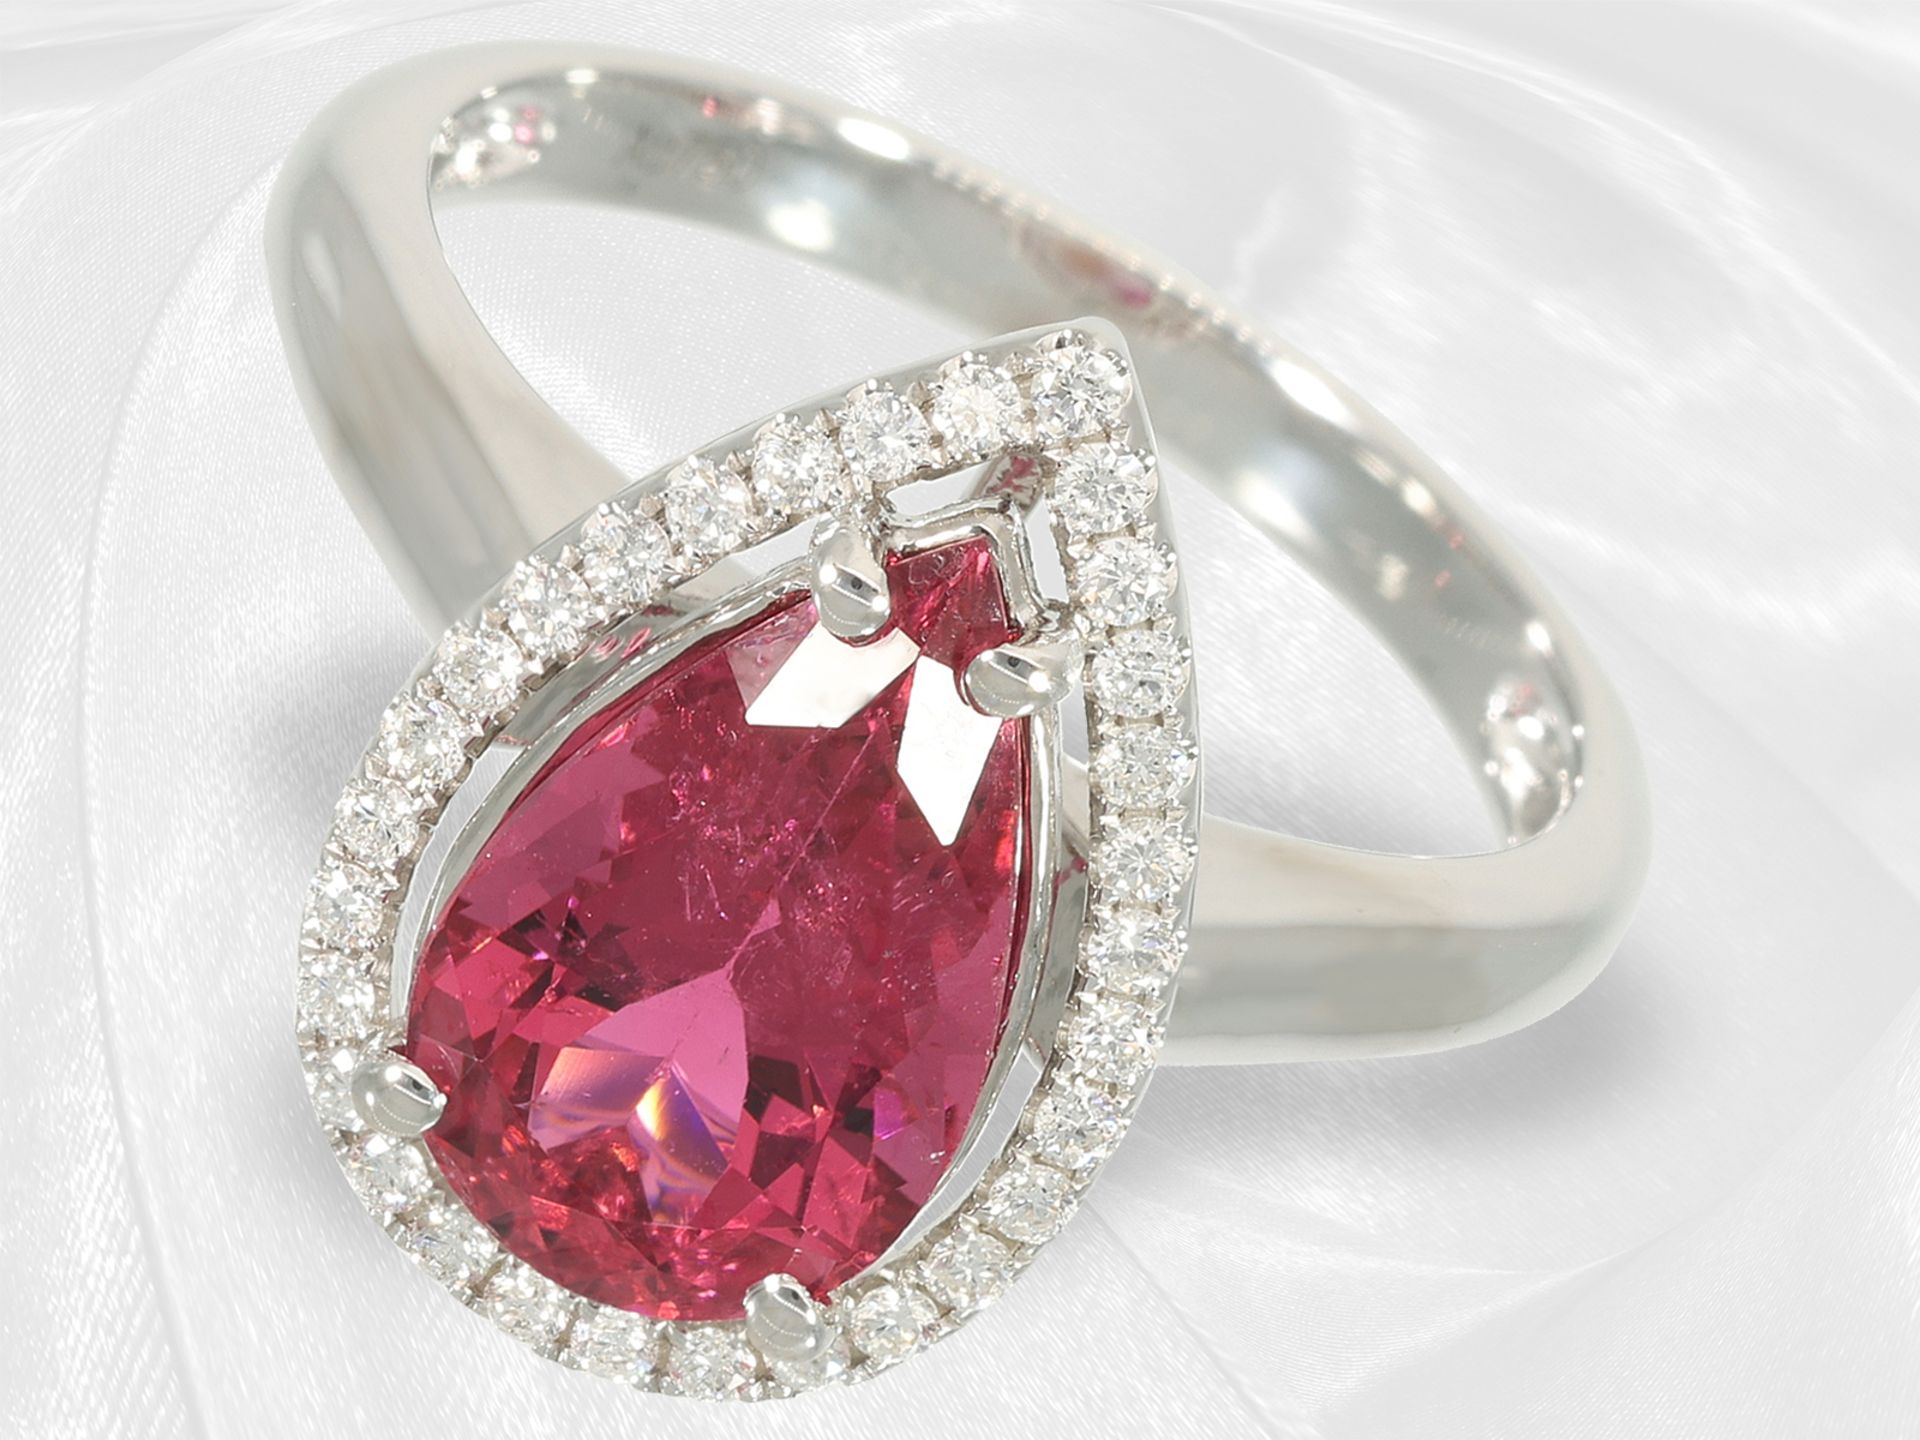 Very beautiful tourmaline/brilliant-cut diamond ring with a drop rubellite of approx. 2.7ct, 18K gol